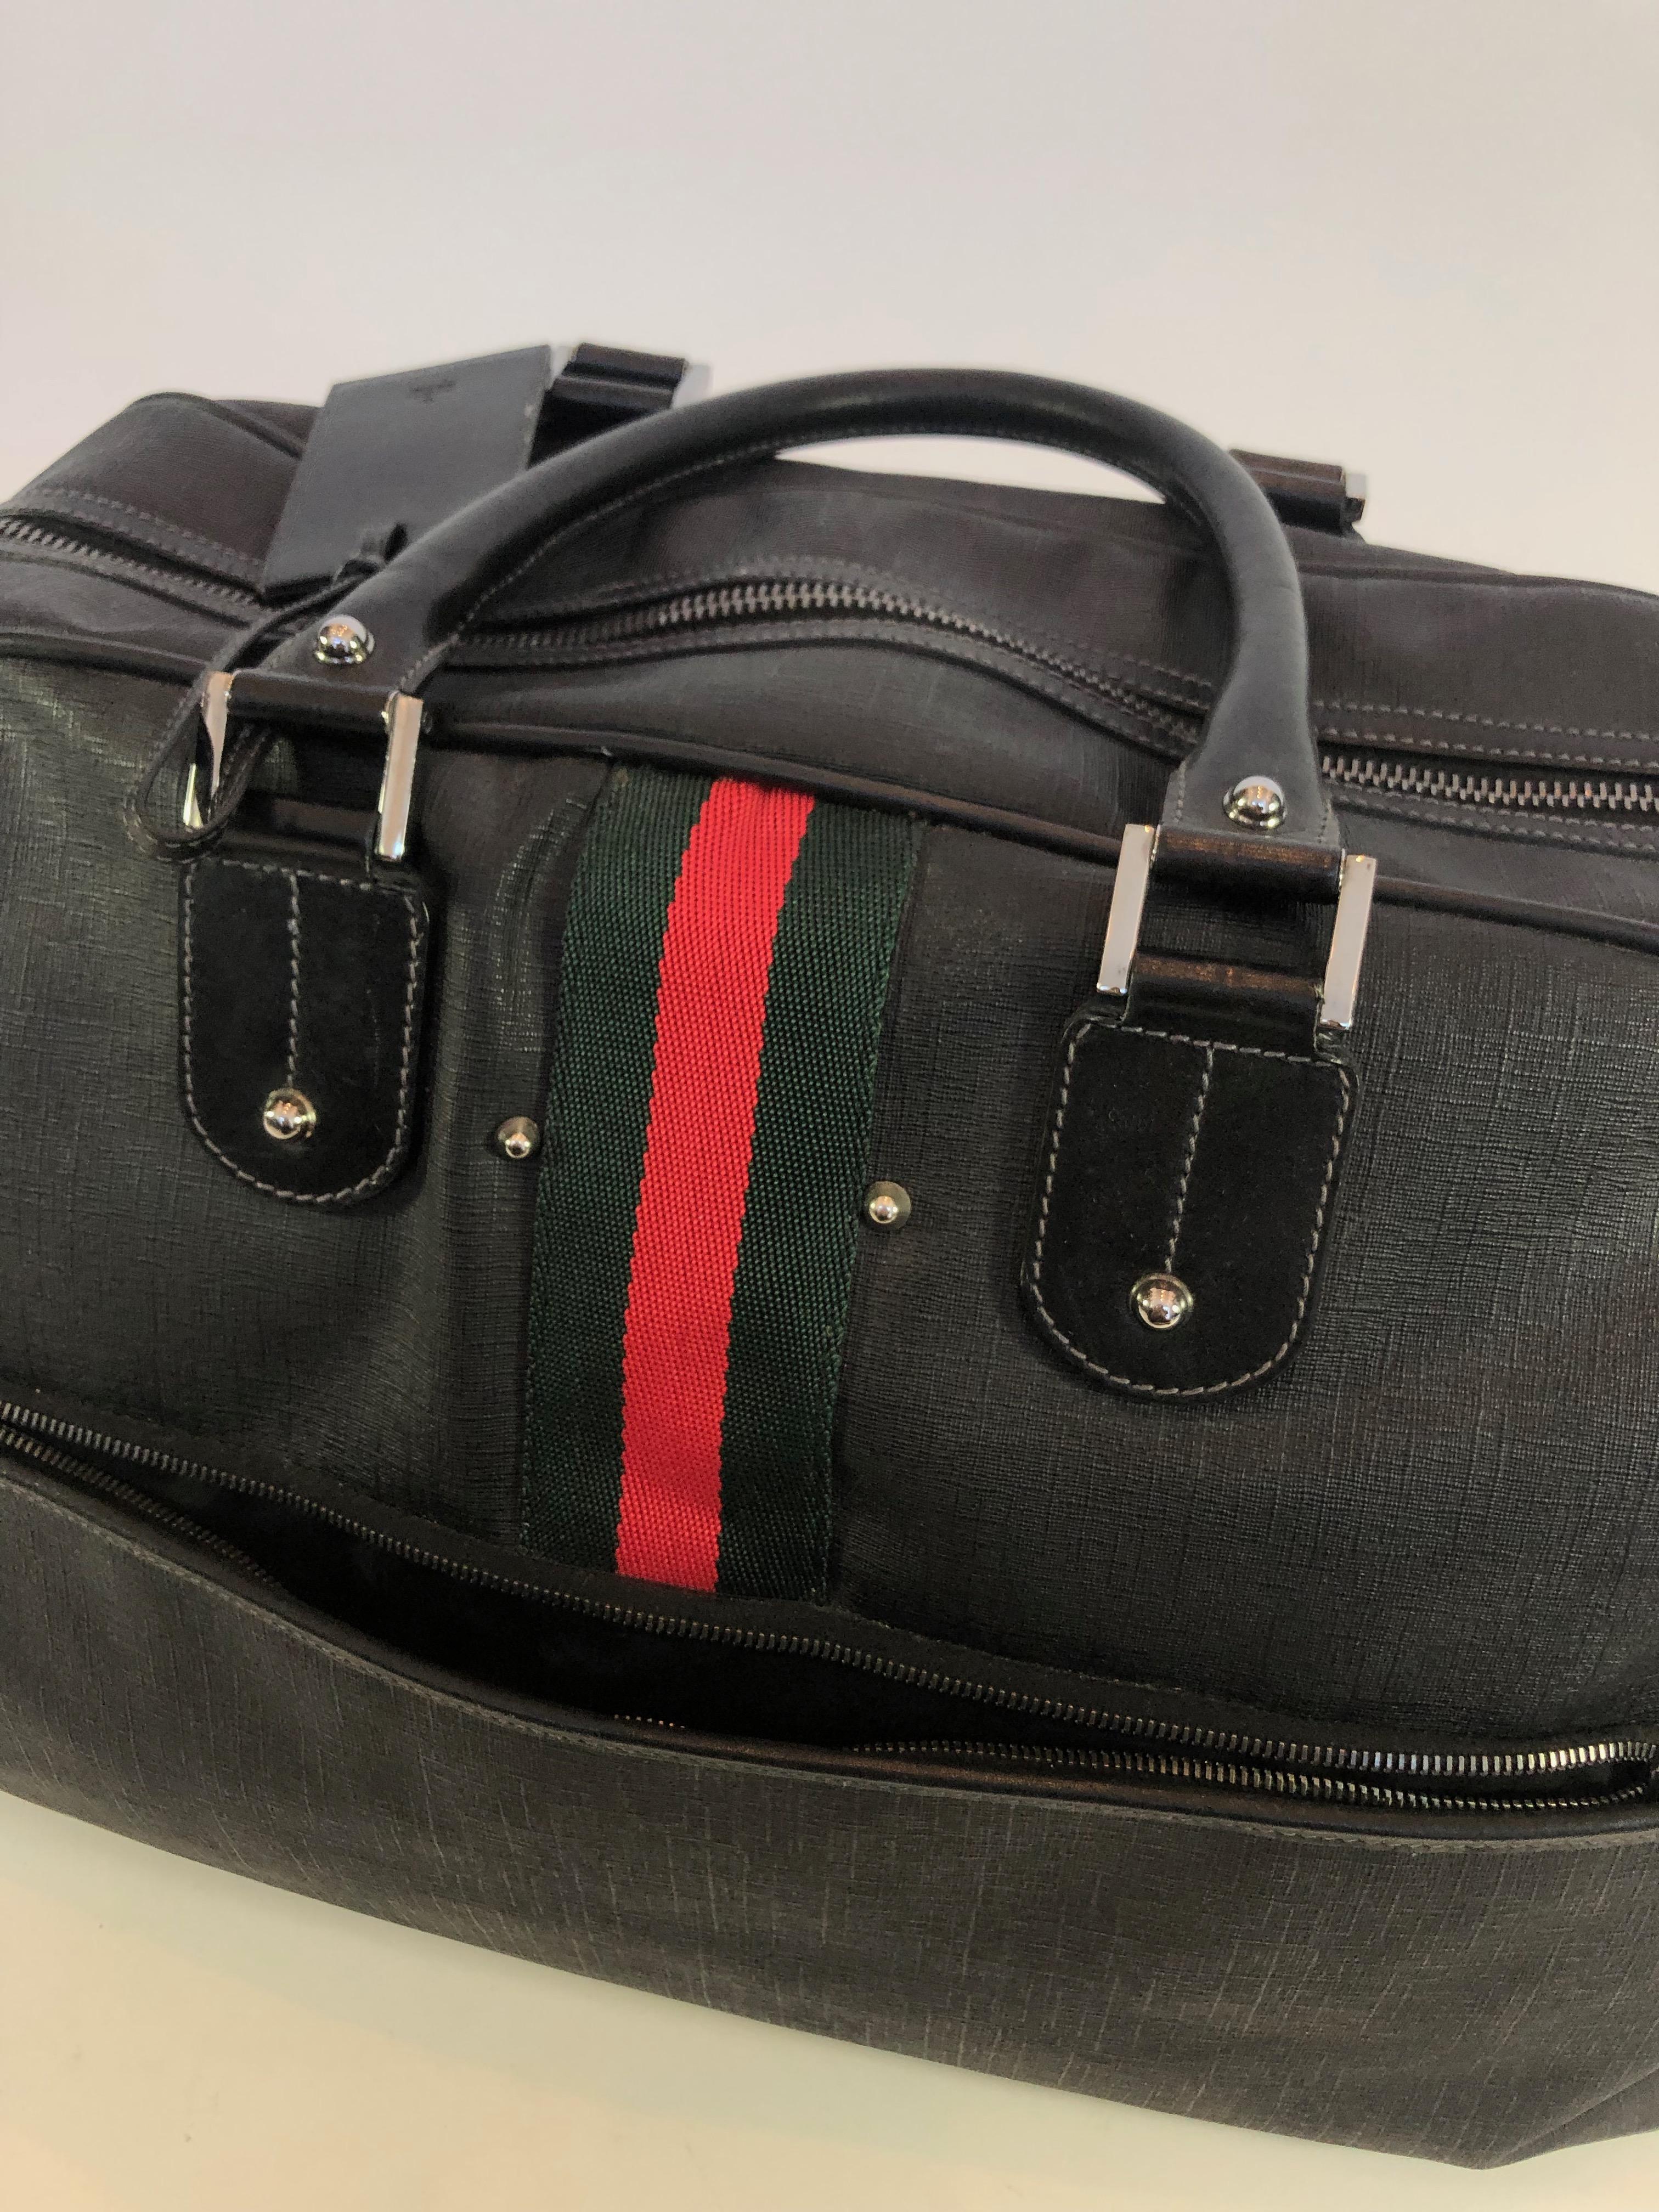 Gucci Black Leather Weekender Suitcase with Classic Green and Red Stripe  For Sale 6